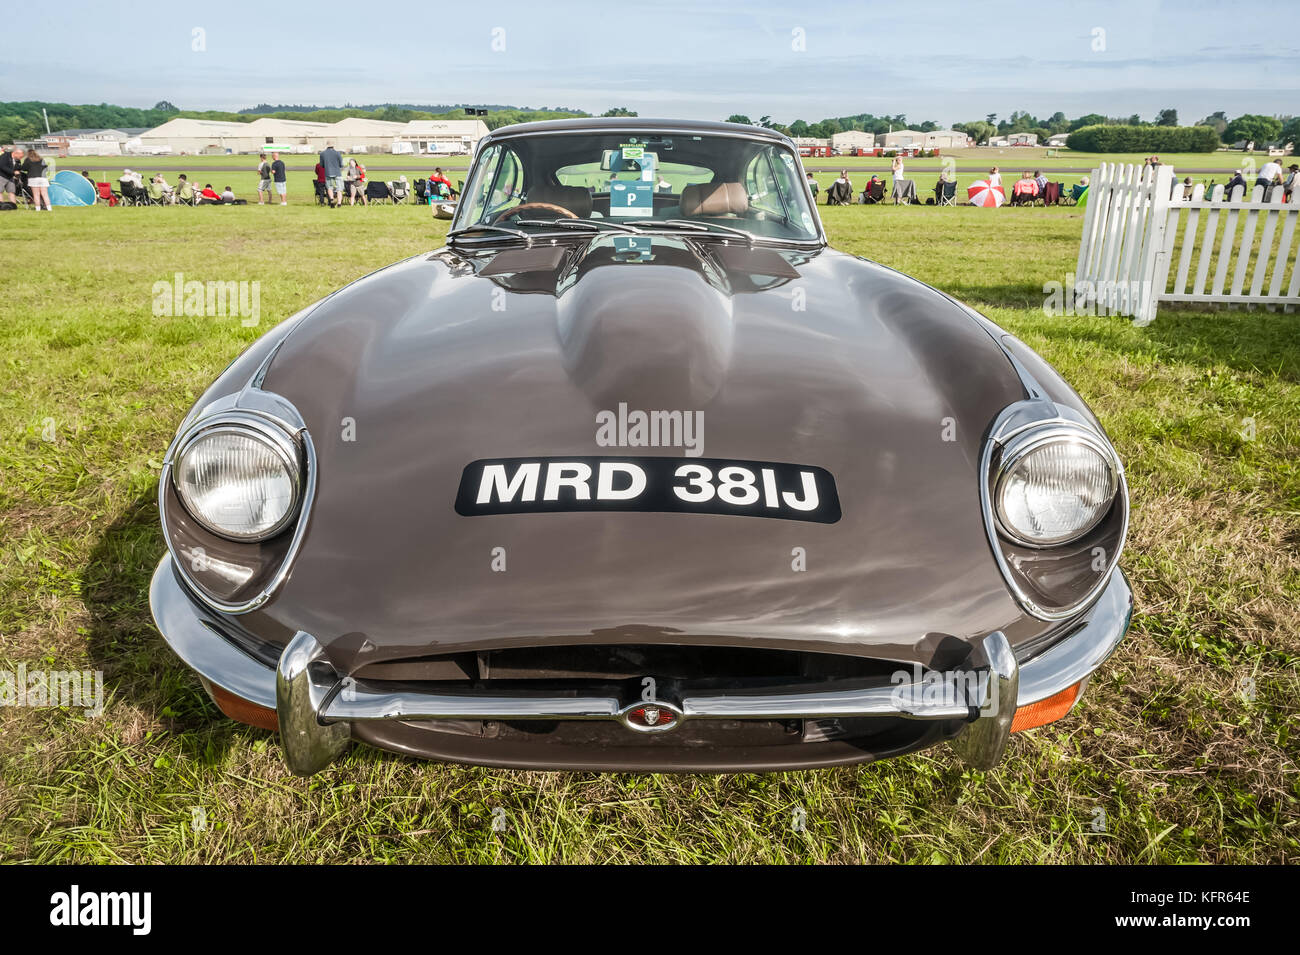 Dunsfold, UK - August 26, 2017: Wide-angle view of a vintage British Jaguar E-Type sports-car in Dunsfold, UK Stock Photo